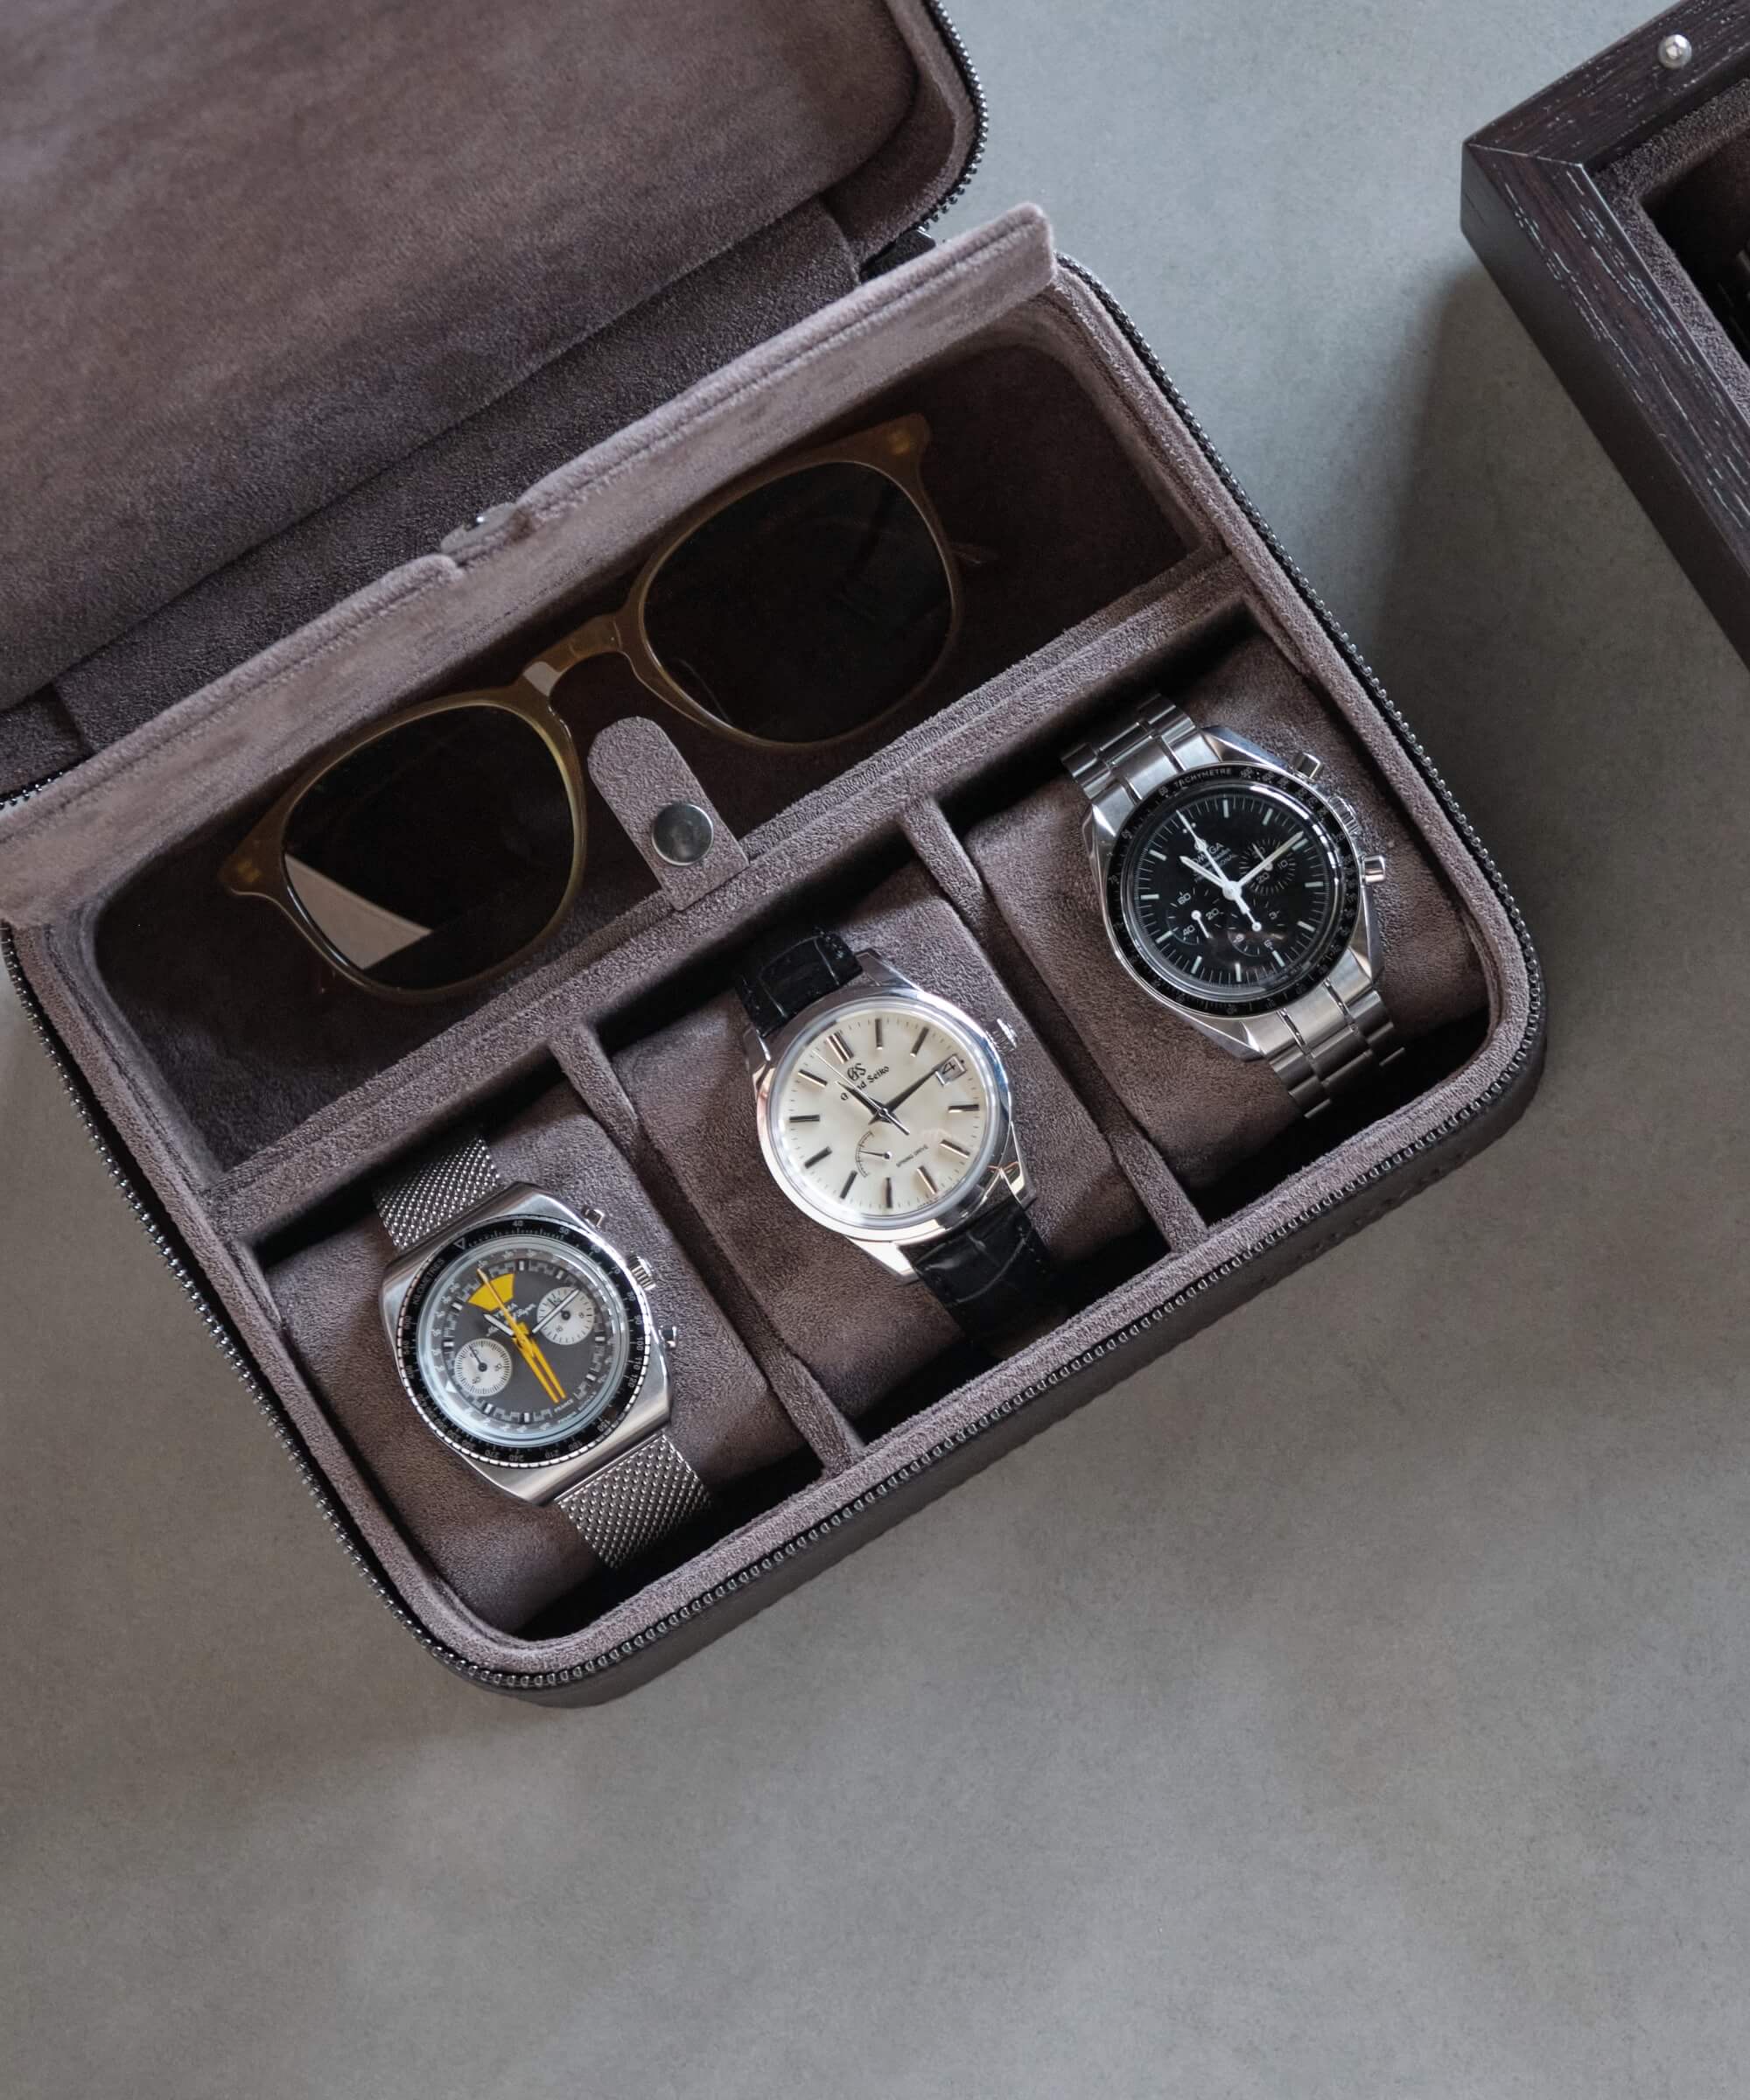 A TAWBURY Fraser 3 Watch Travel Case with Storage - Brown, a watch lover's collection of three elegant timepieces, neatly arranged in the stylish leather case on a table.